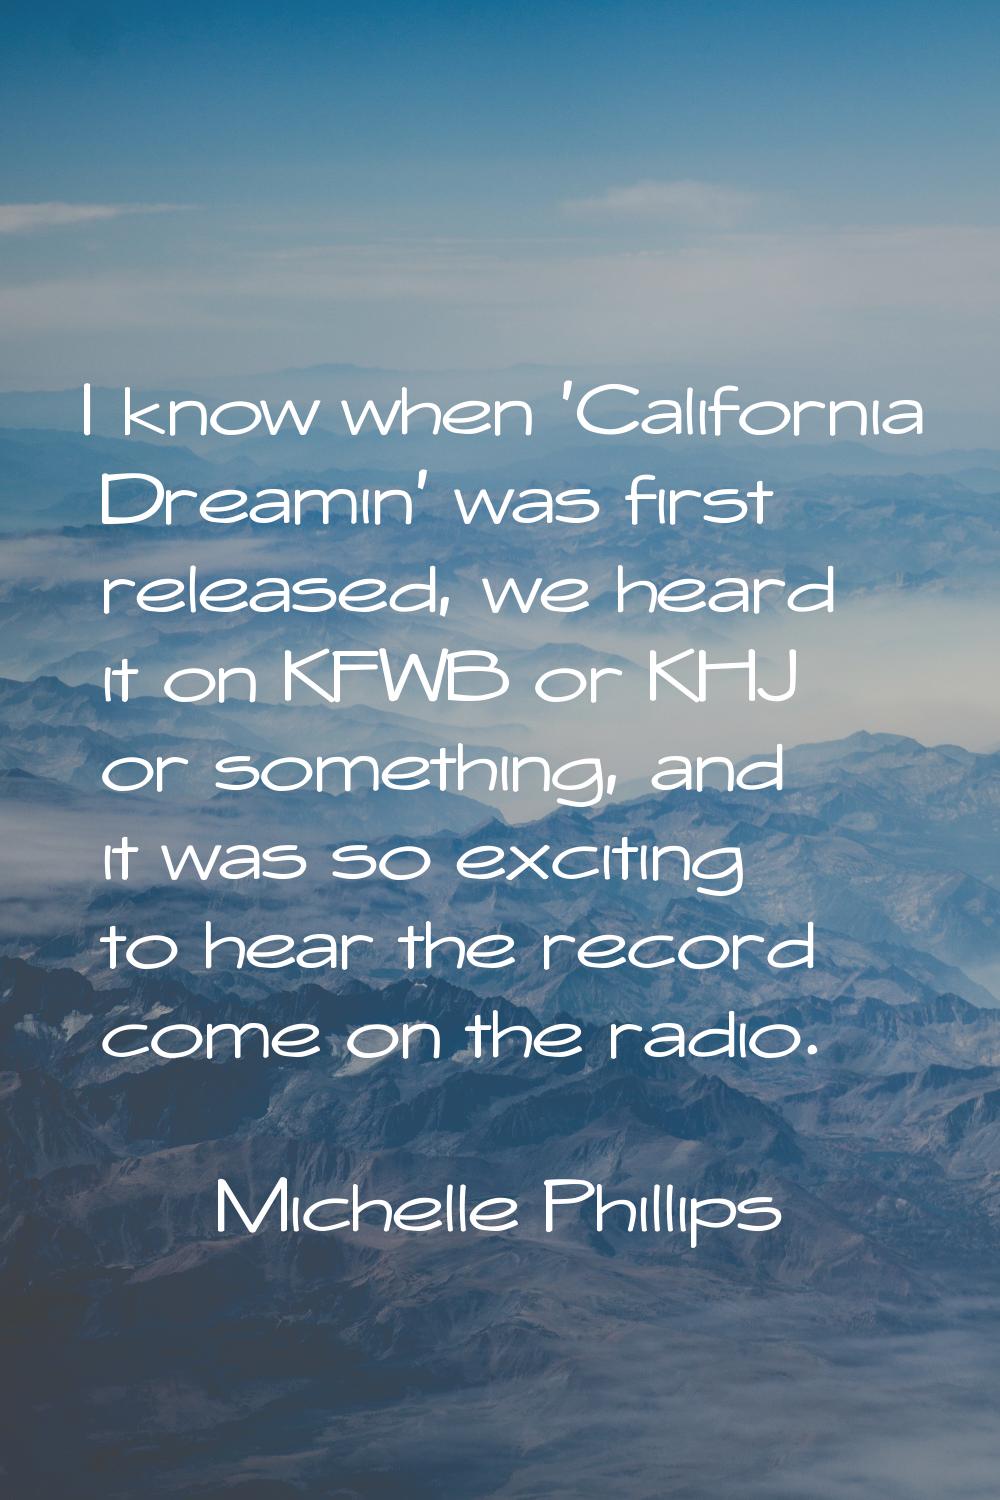 I know when 'California Dreamin' was first released, we heard it on KFWB or KHJ or something, and i